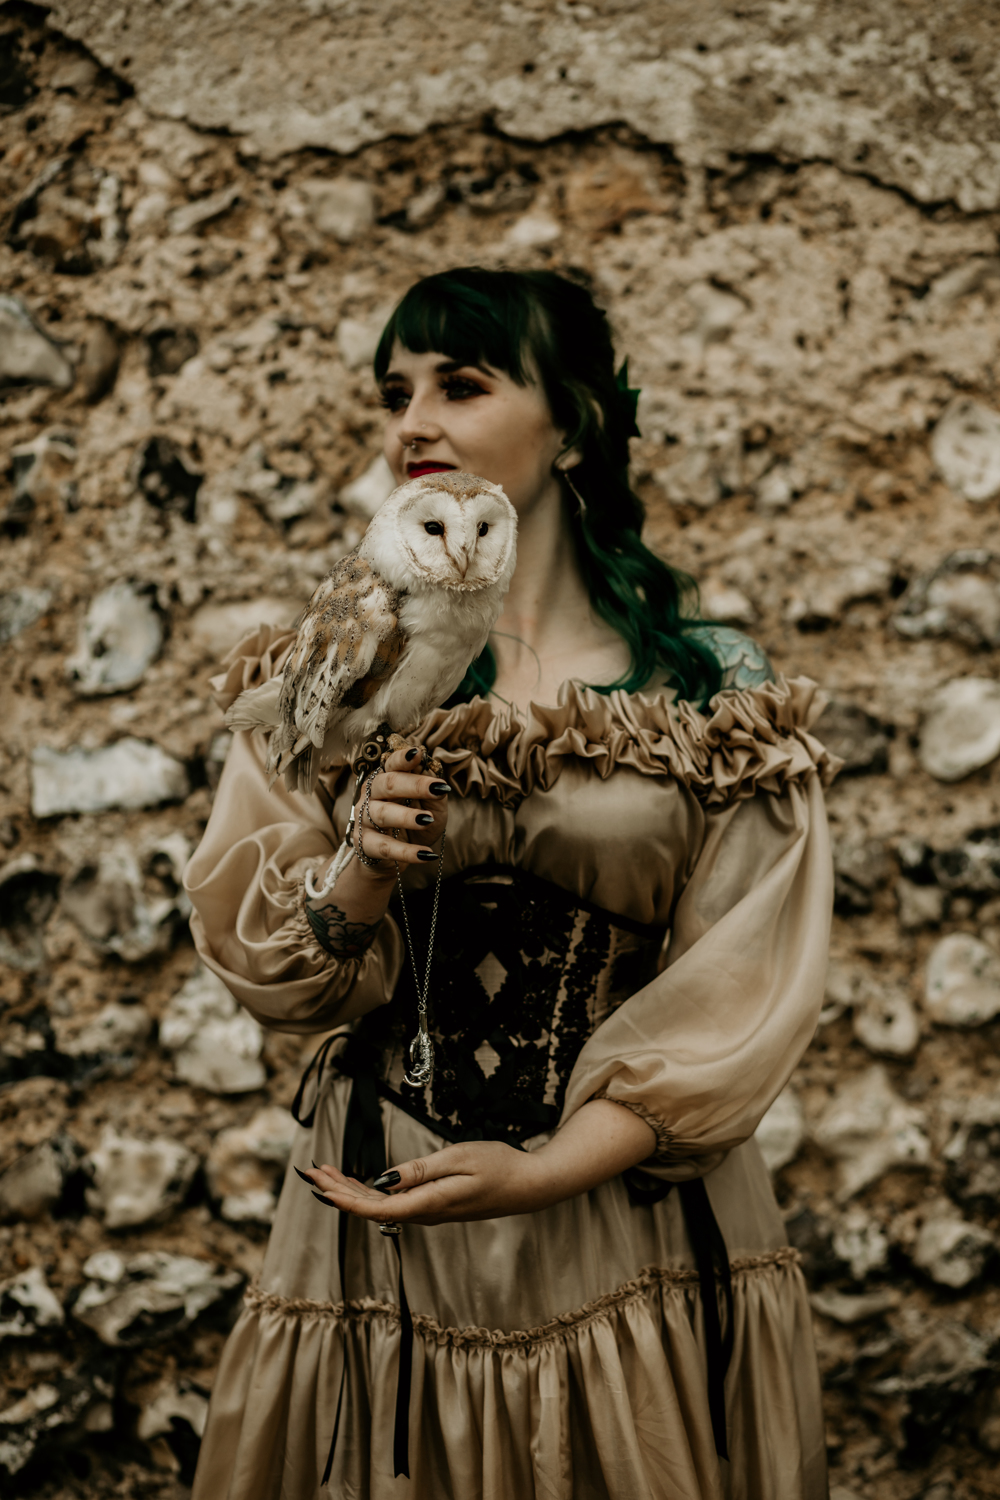 This wedding shoot was inspired by Medieval times and dark fairytales